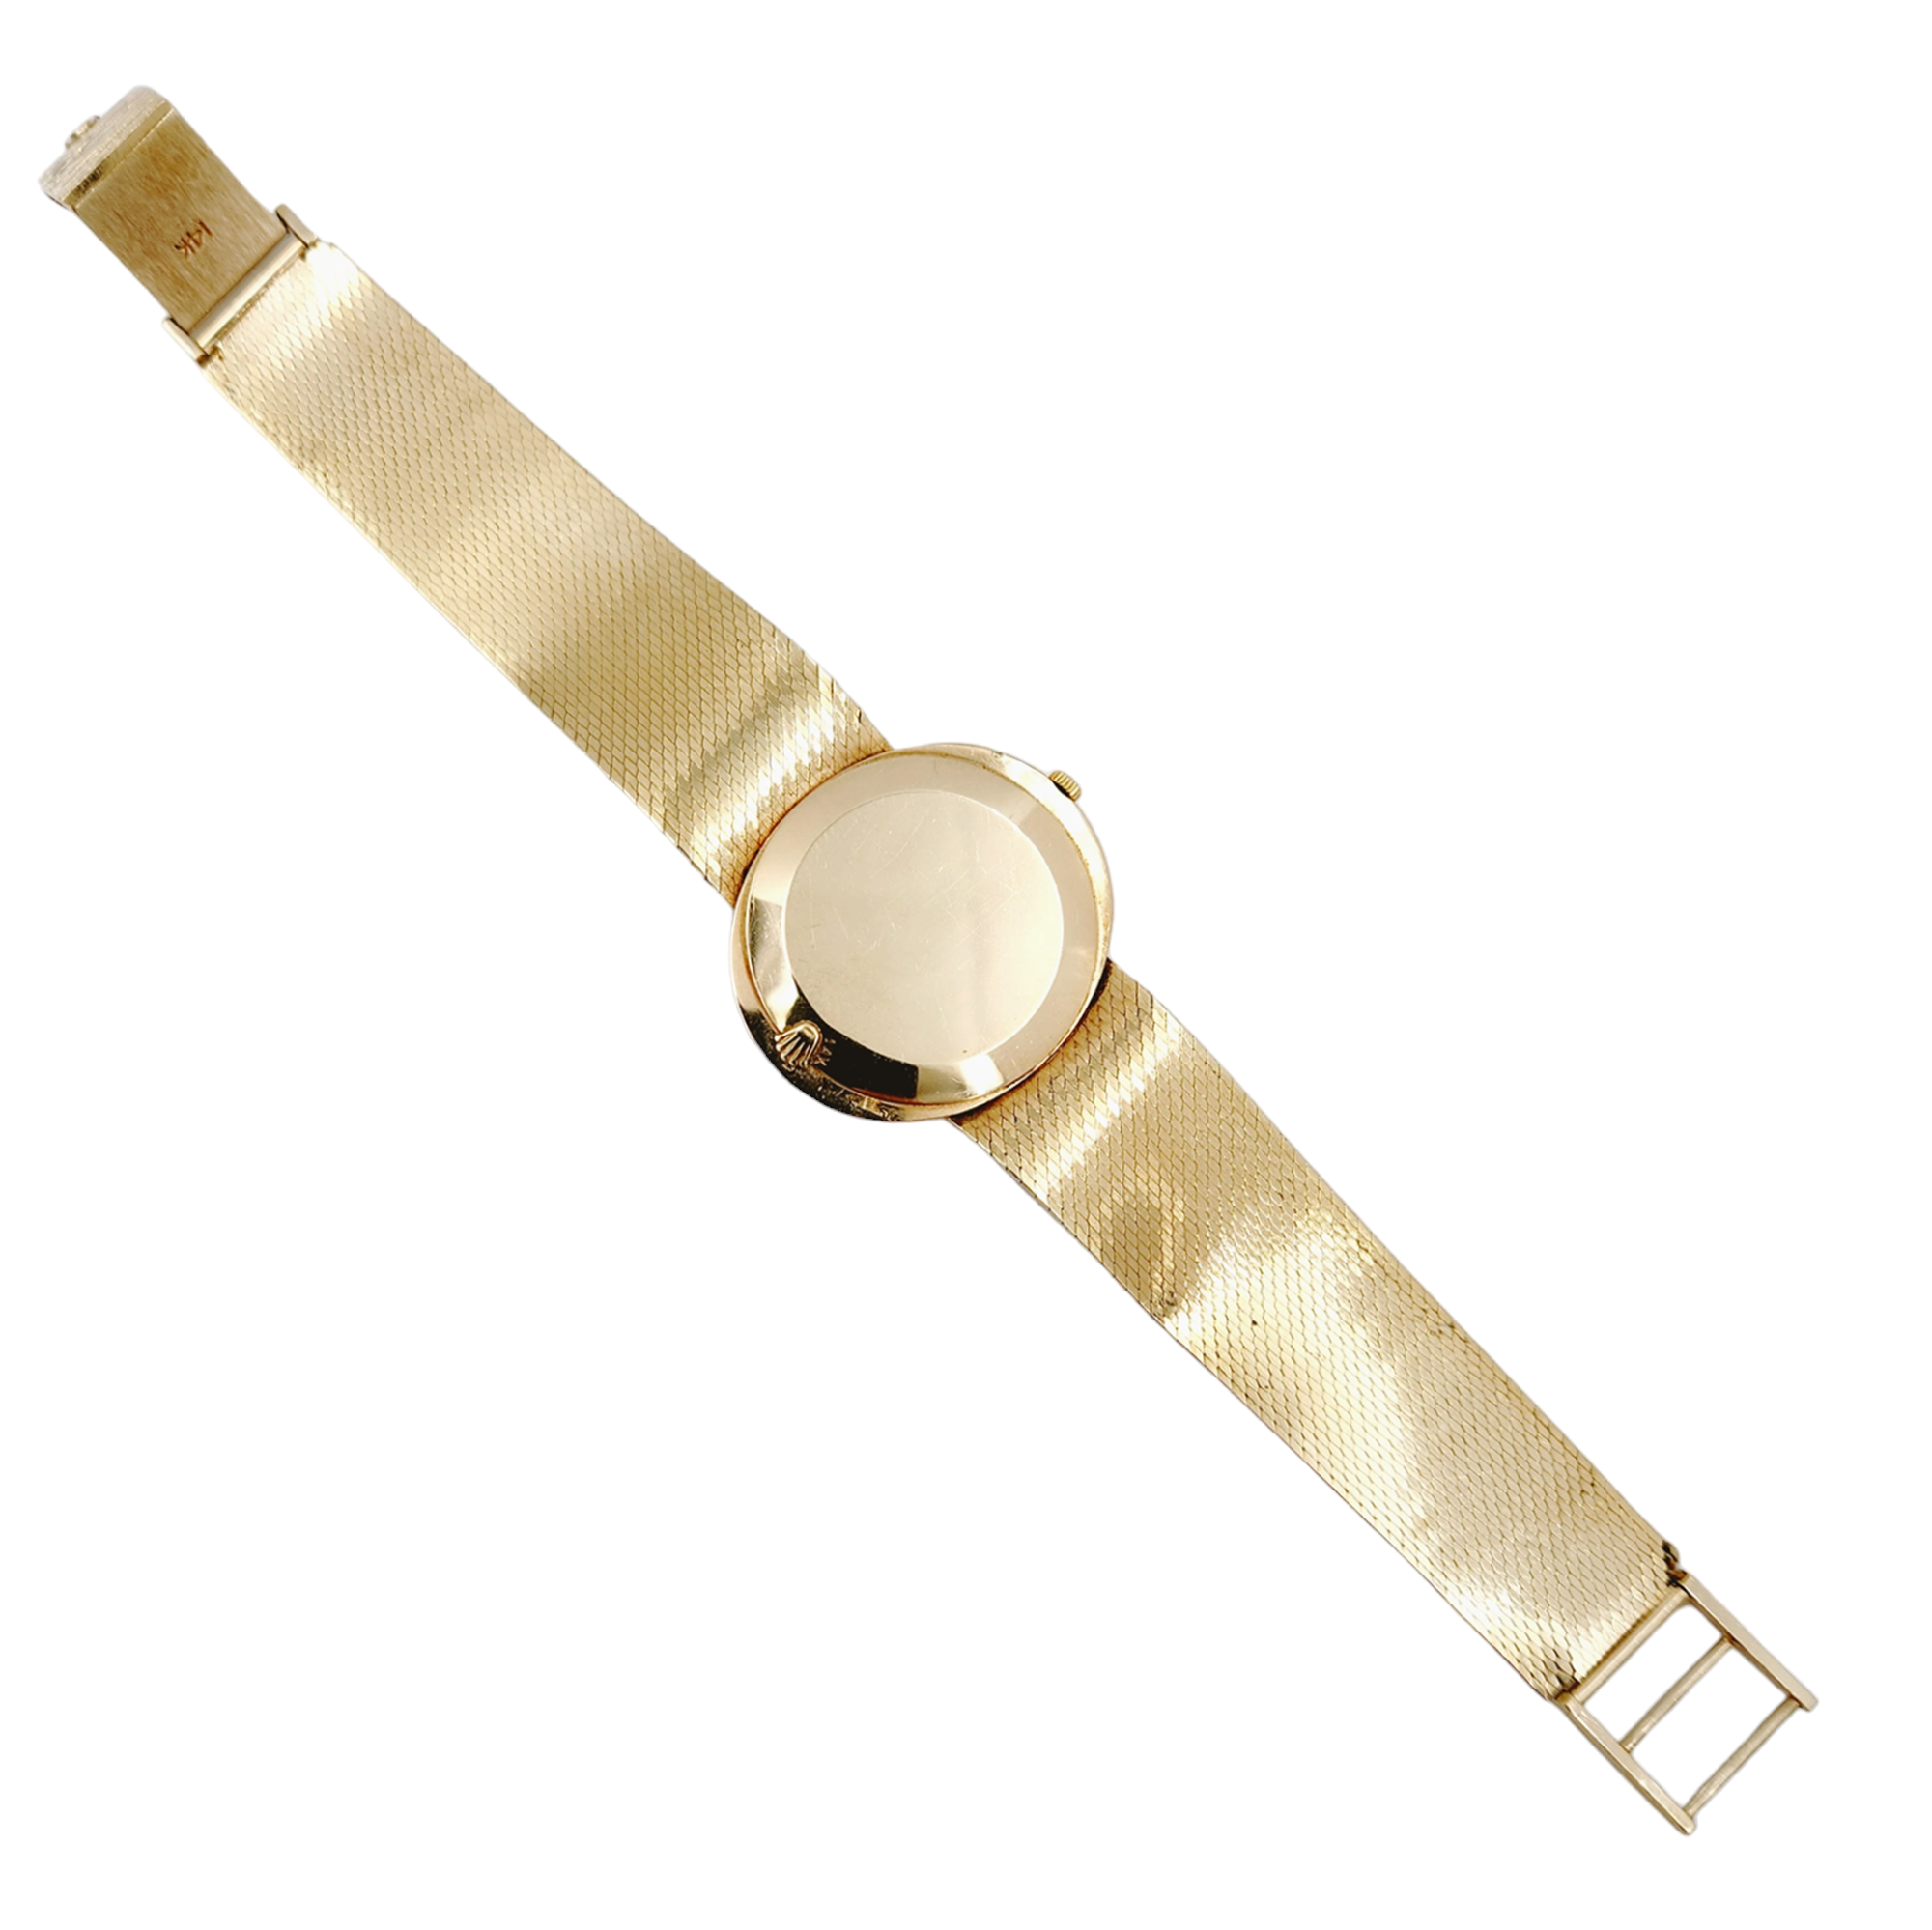 Unisex Rolex Cellini Vintage 14K Yellow Gold Wristwatch w/ Light Champagne Dial & Smooth Bezel. (Pre-Owned)